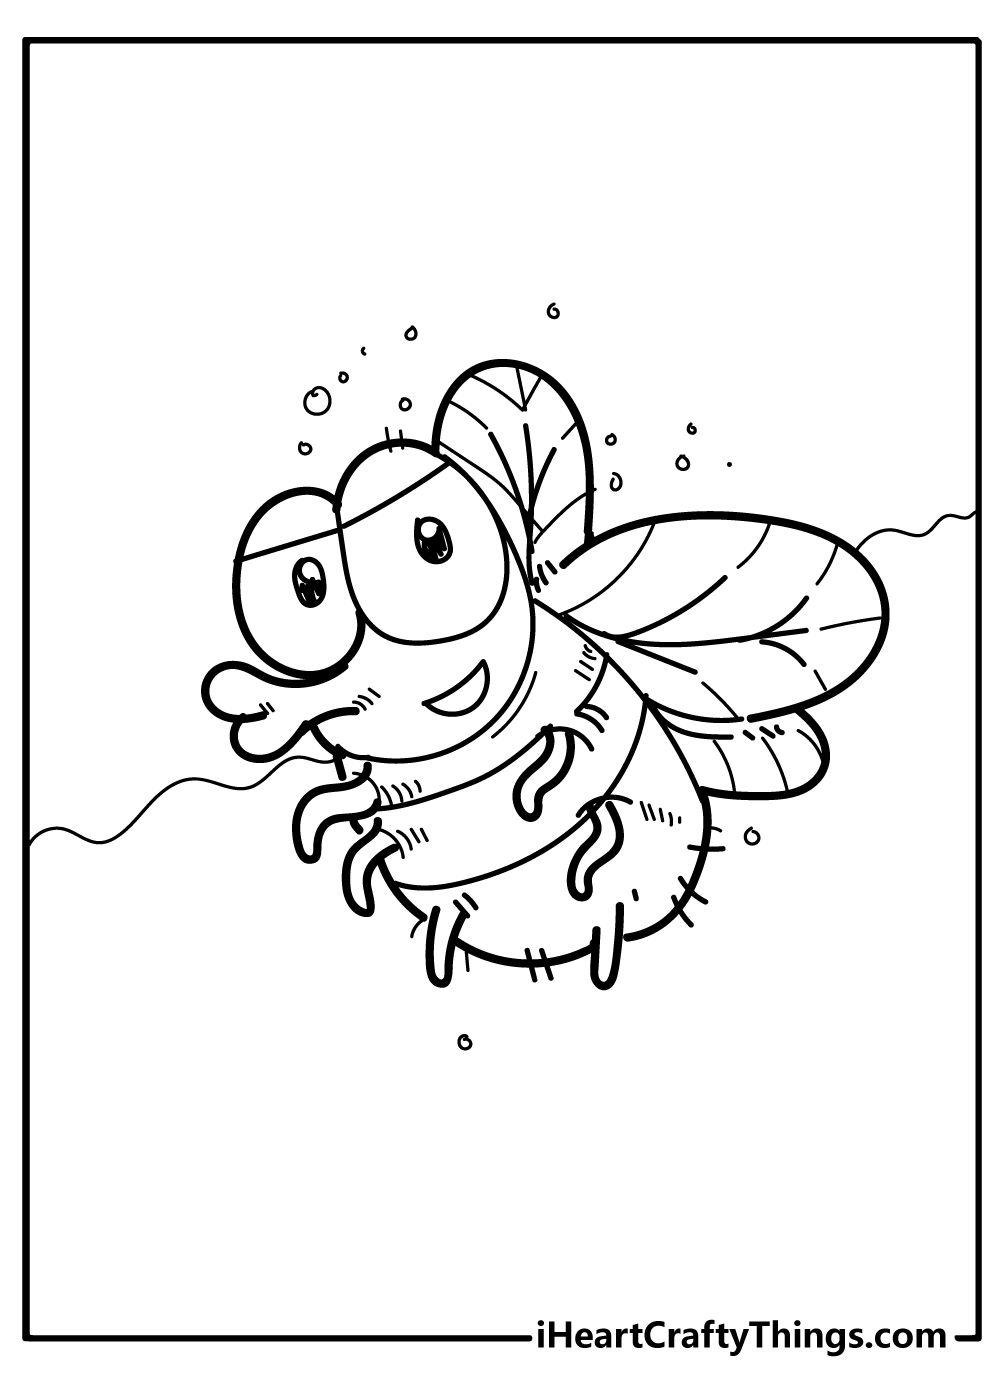 Bug Coloring Pages for preschoolers free printable